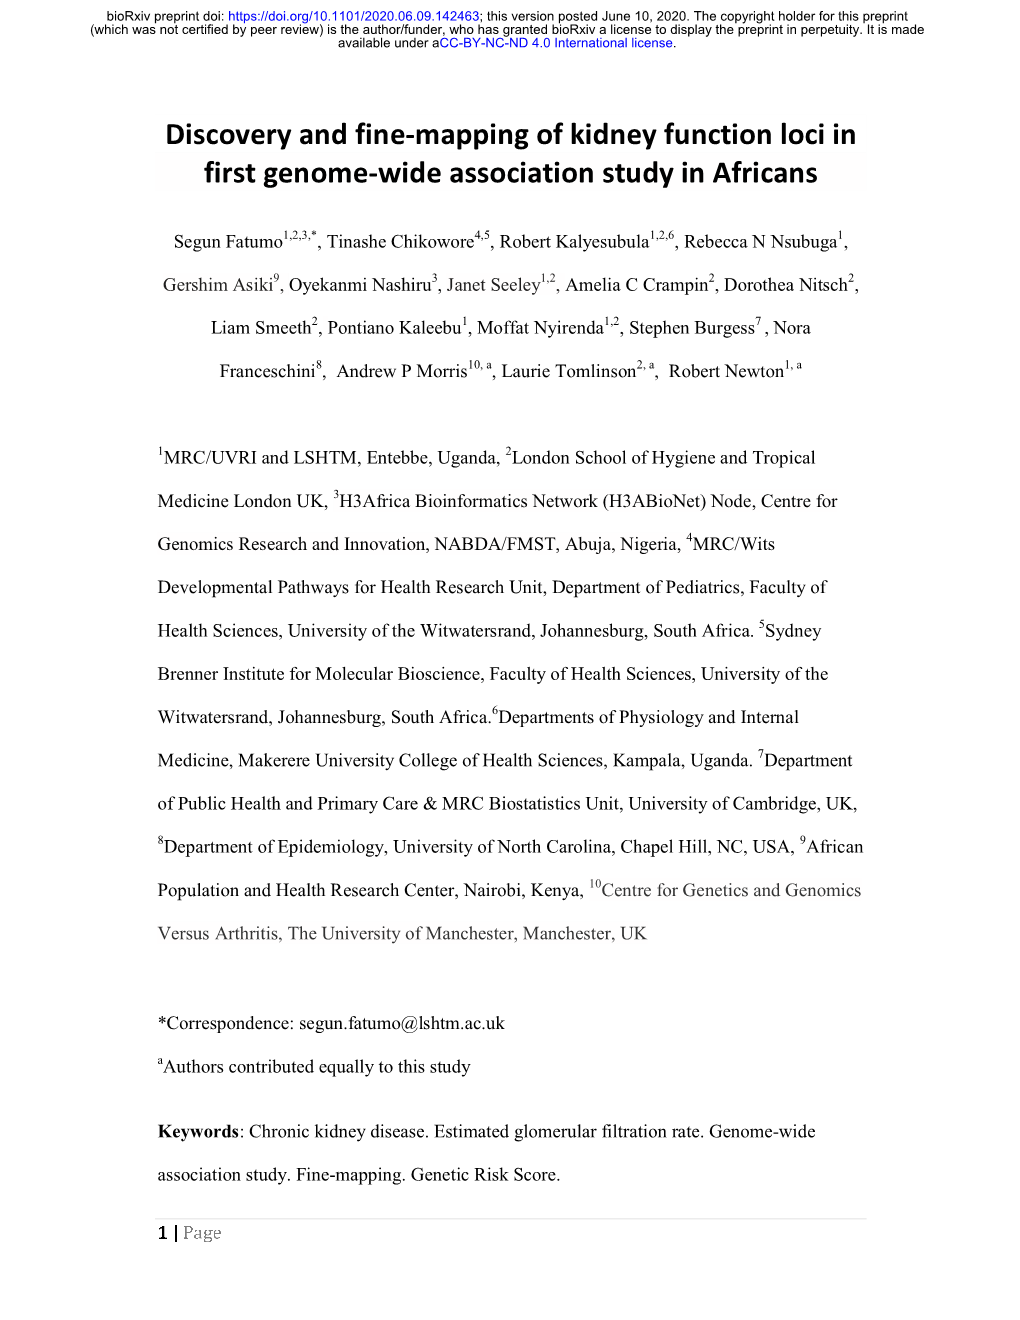 Discovery and Fine-Mapping of Kidney Function Loci in First Genome-Wide Association Study in Africans